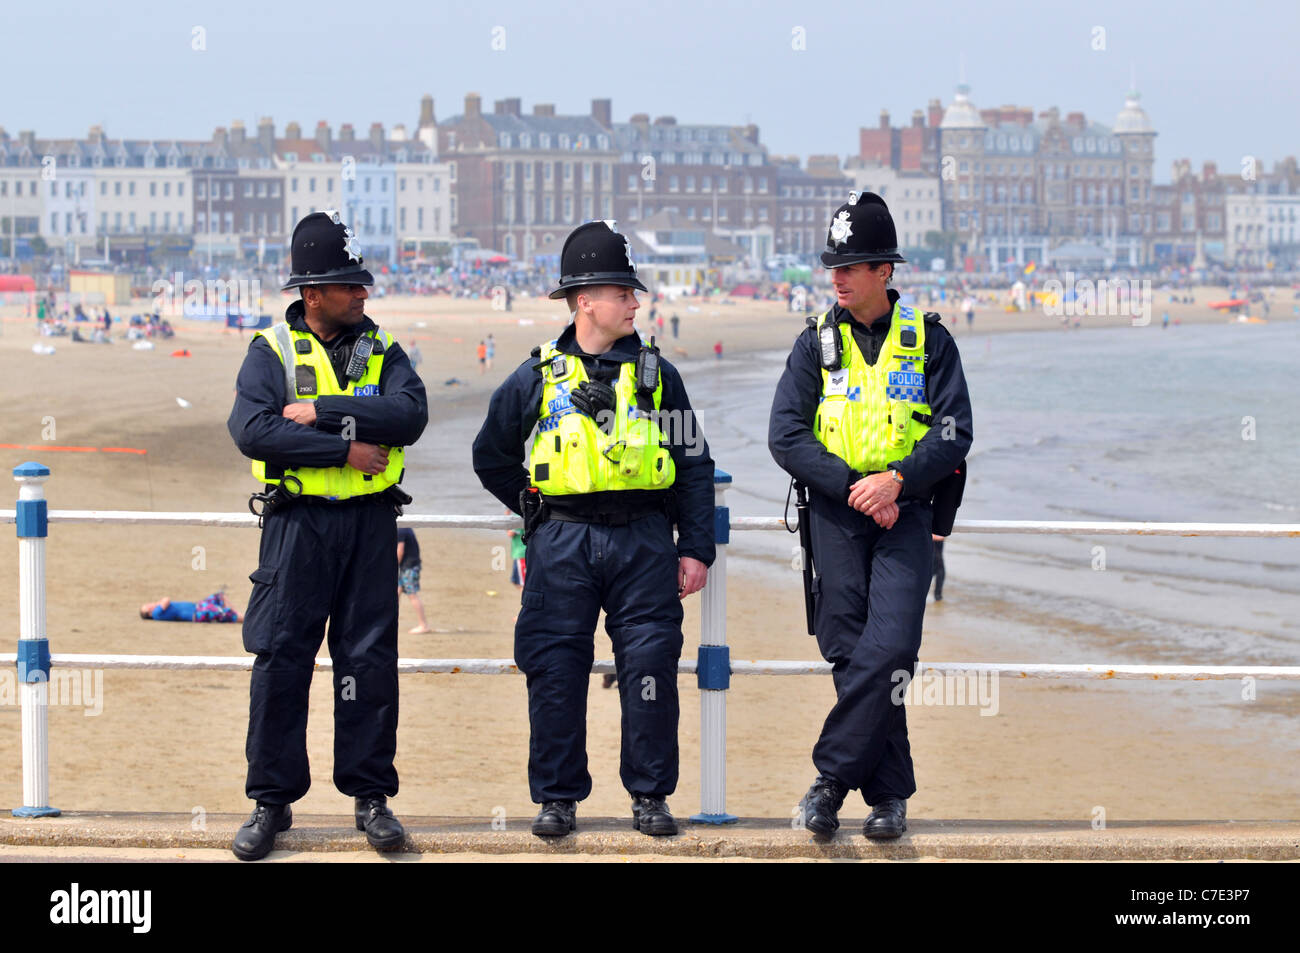 Police officers on duty, Weymouth, Dorset, Britain, UK Stock Photo